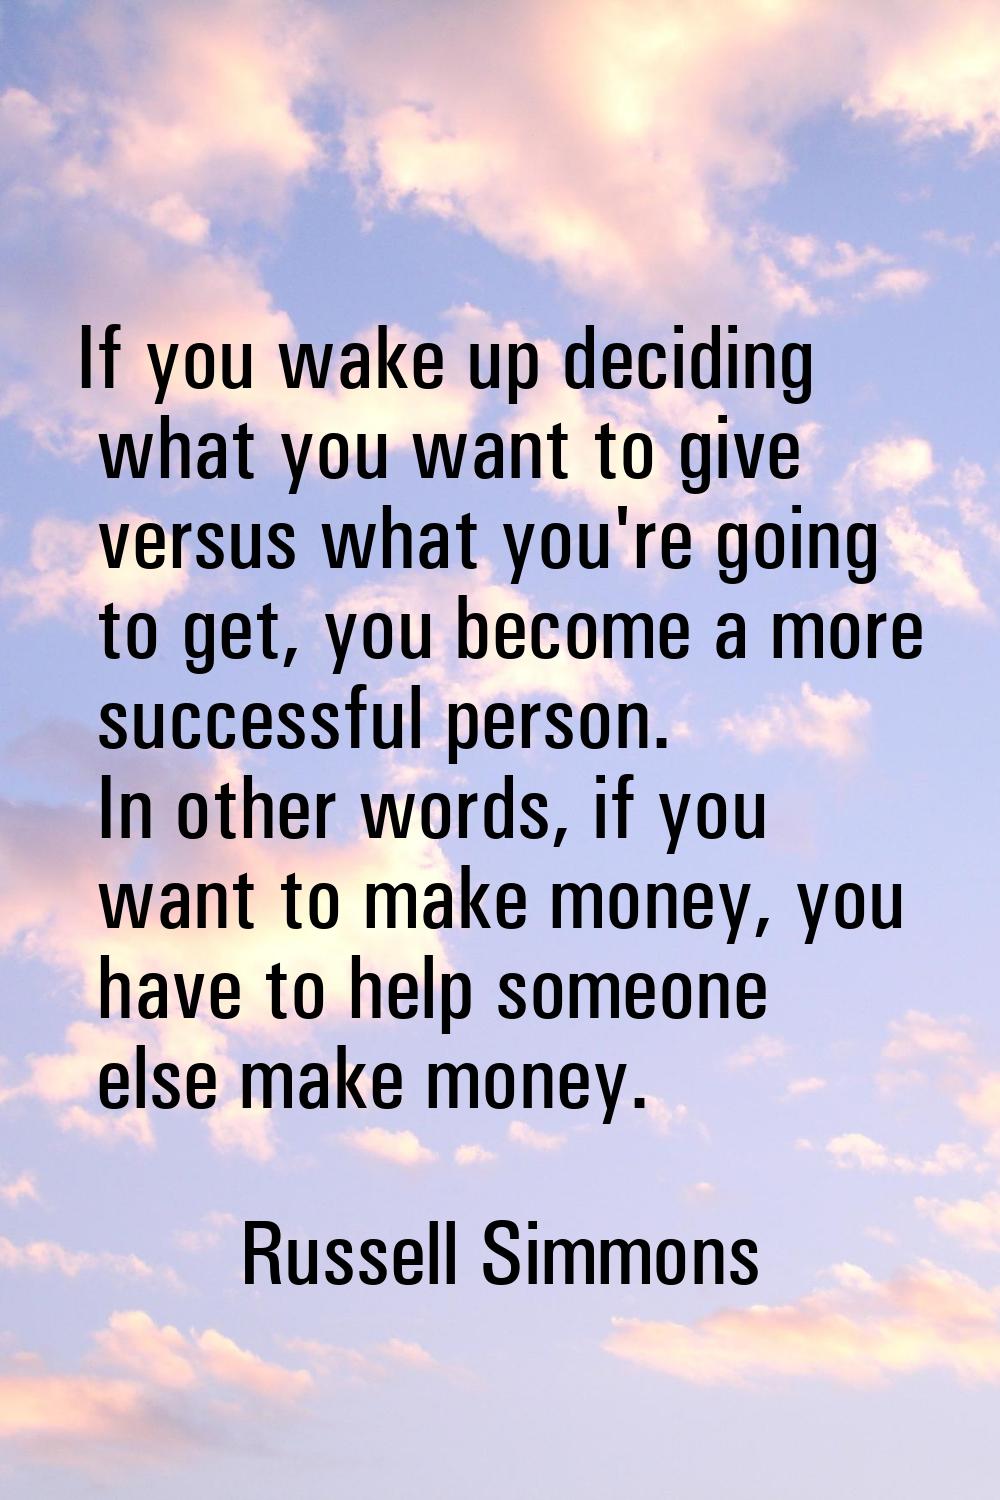 If you wake up deciding what you want to give versus what you're going to get, you become a more su